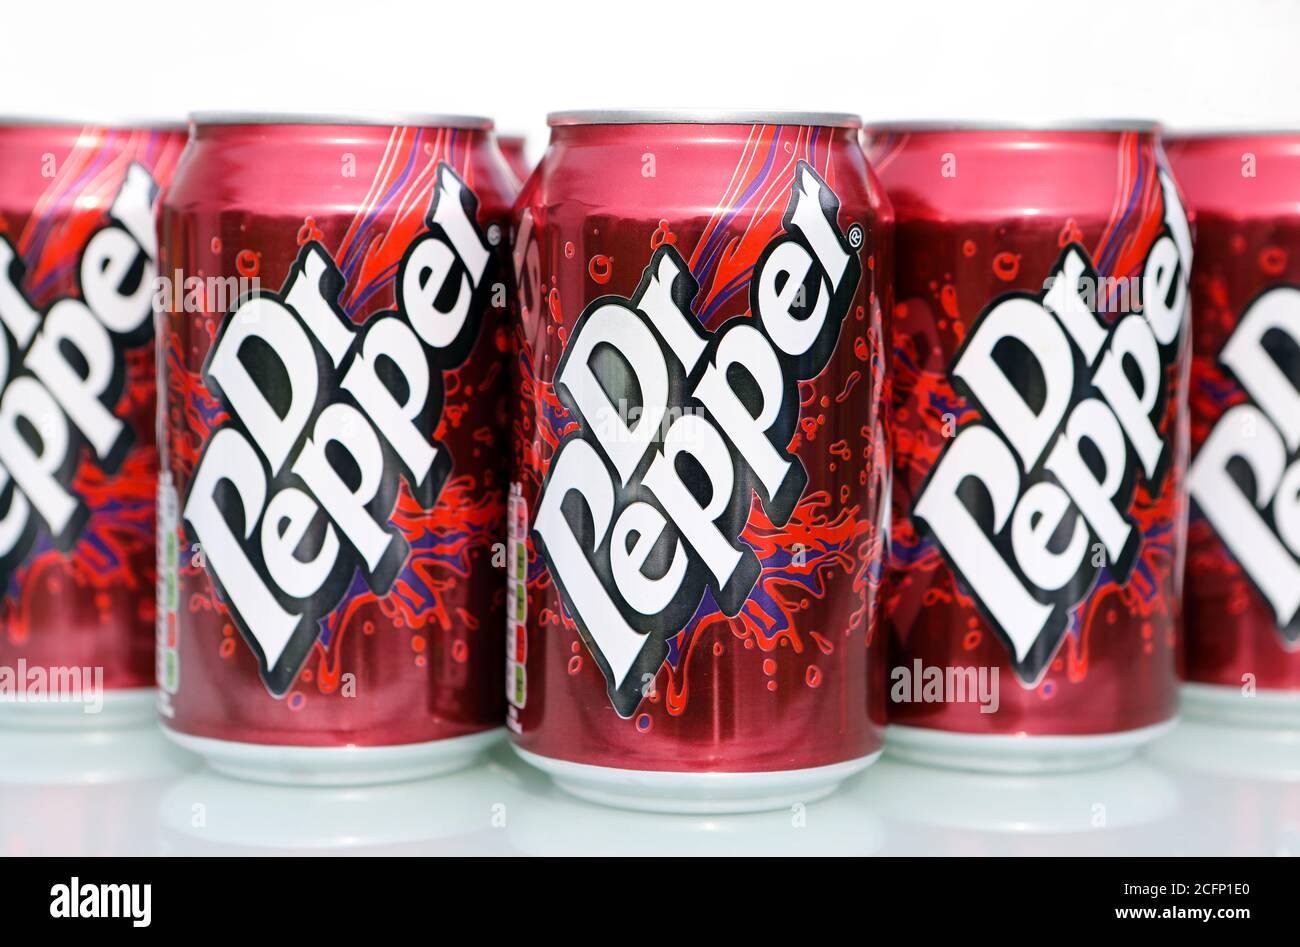 Cans of Dr Pepper Stock Photo